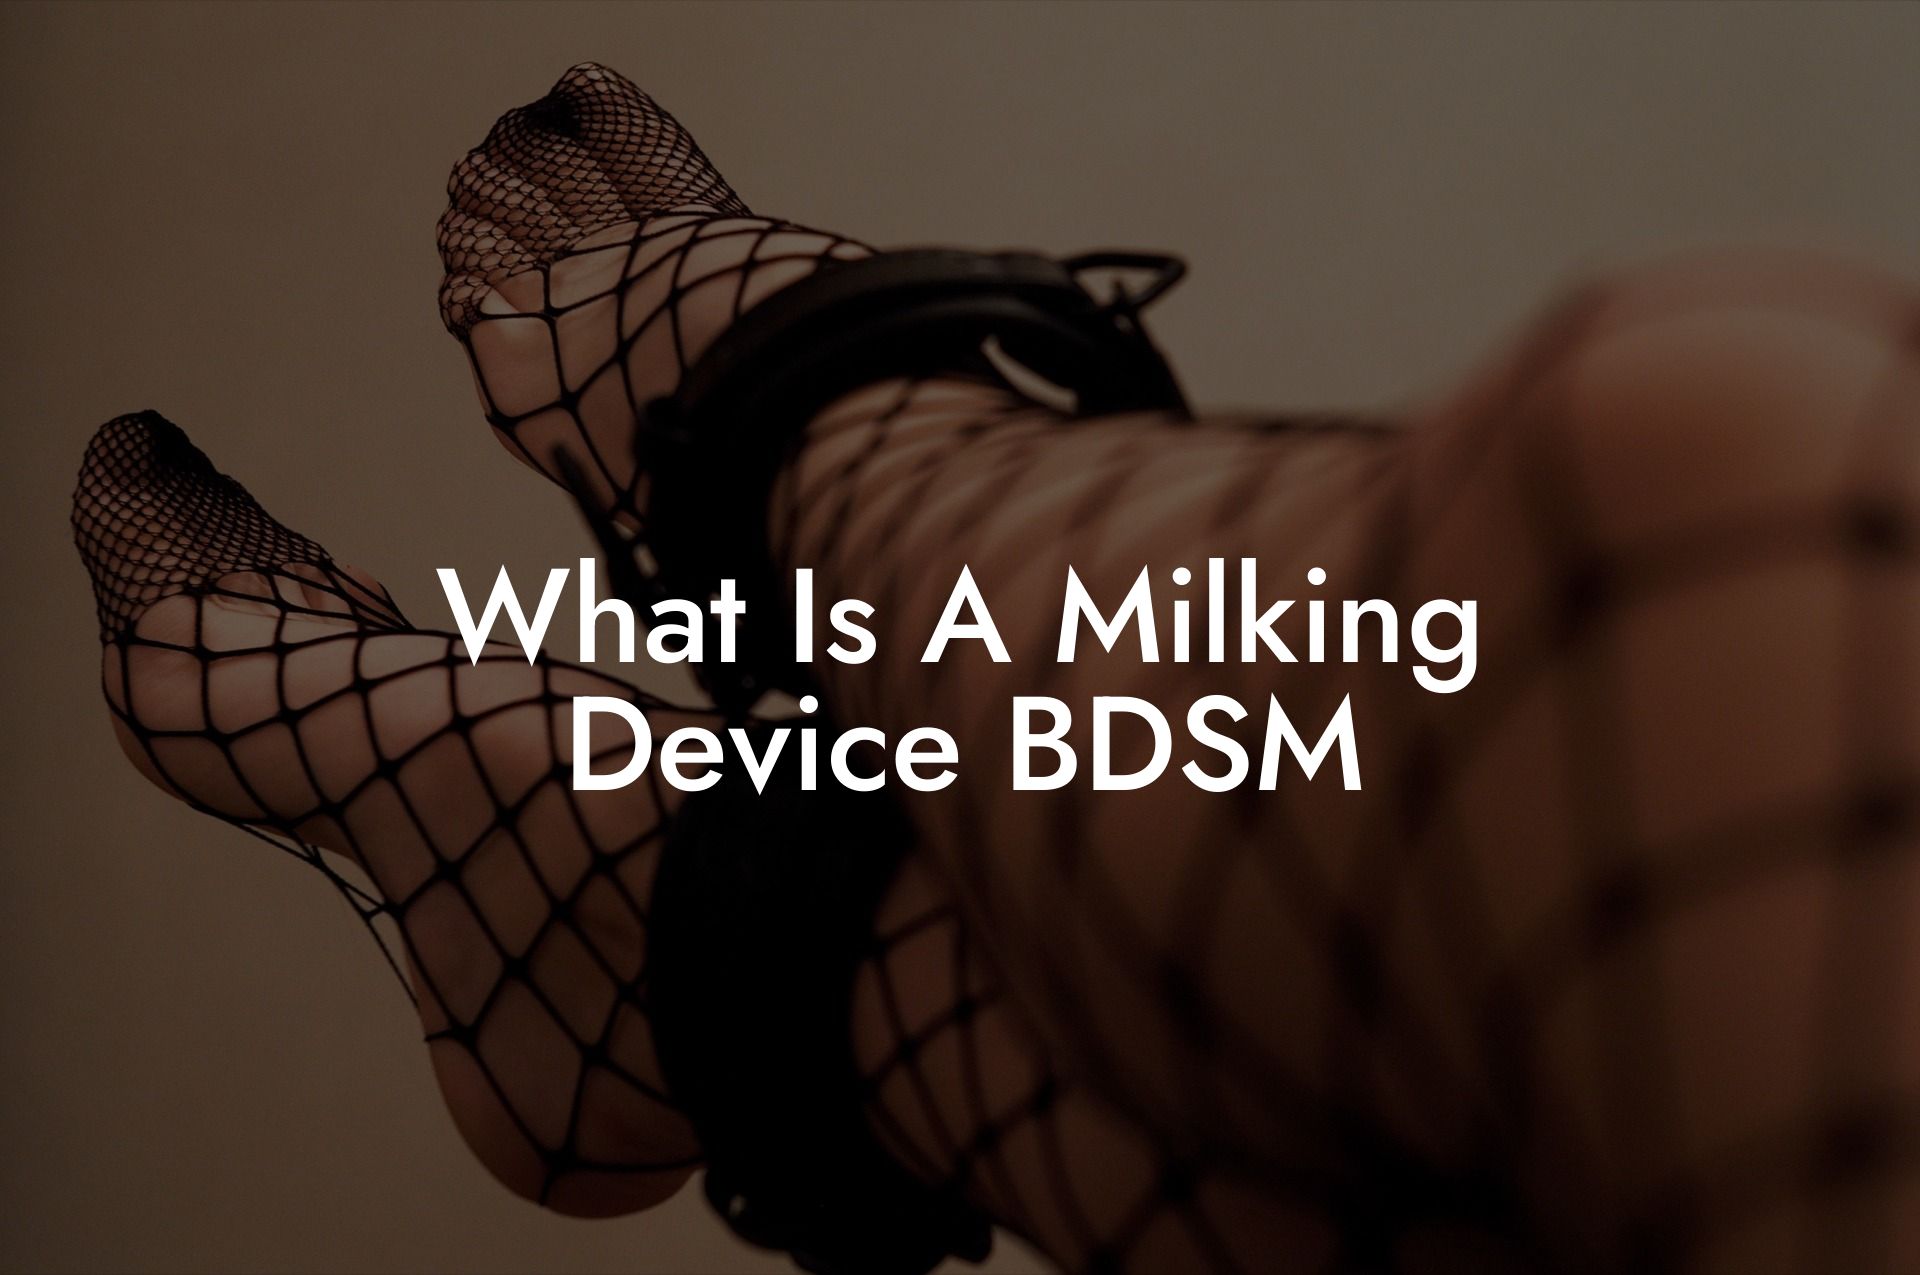 What Is A Milking Device BDSM